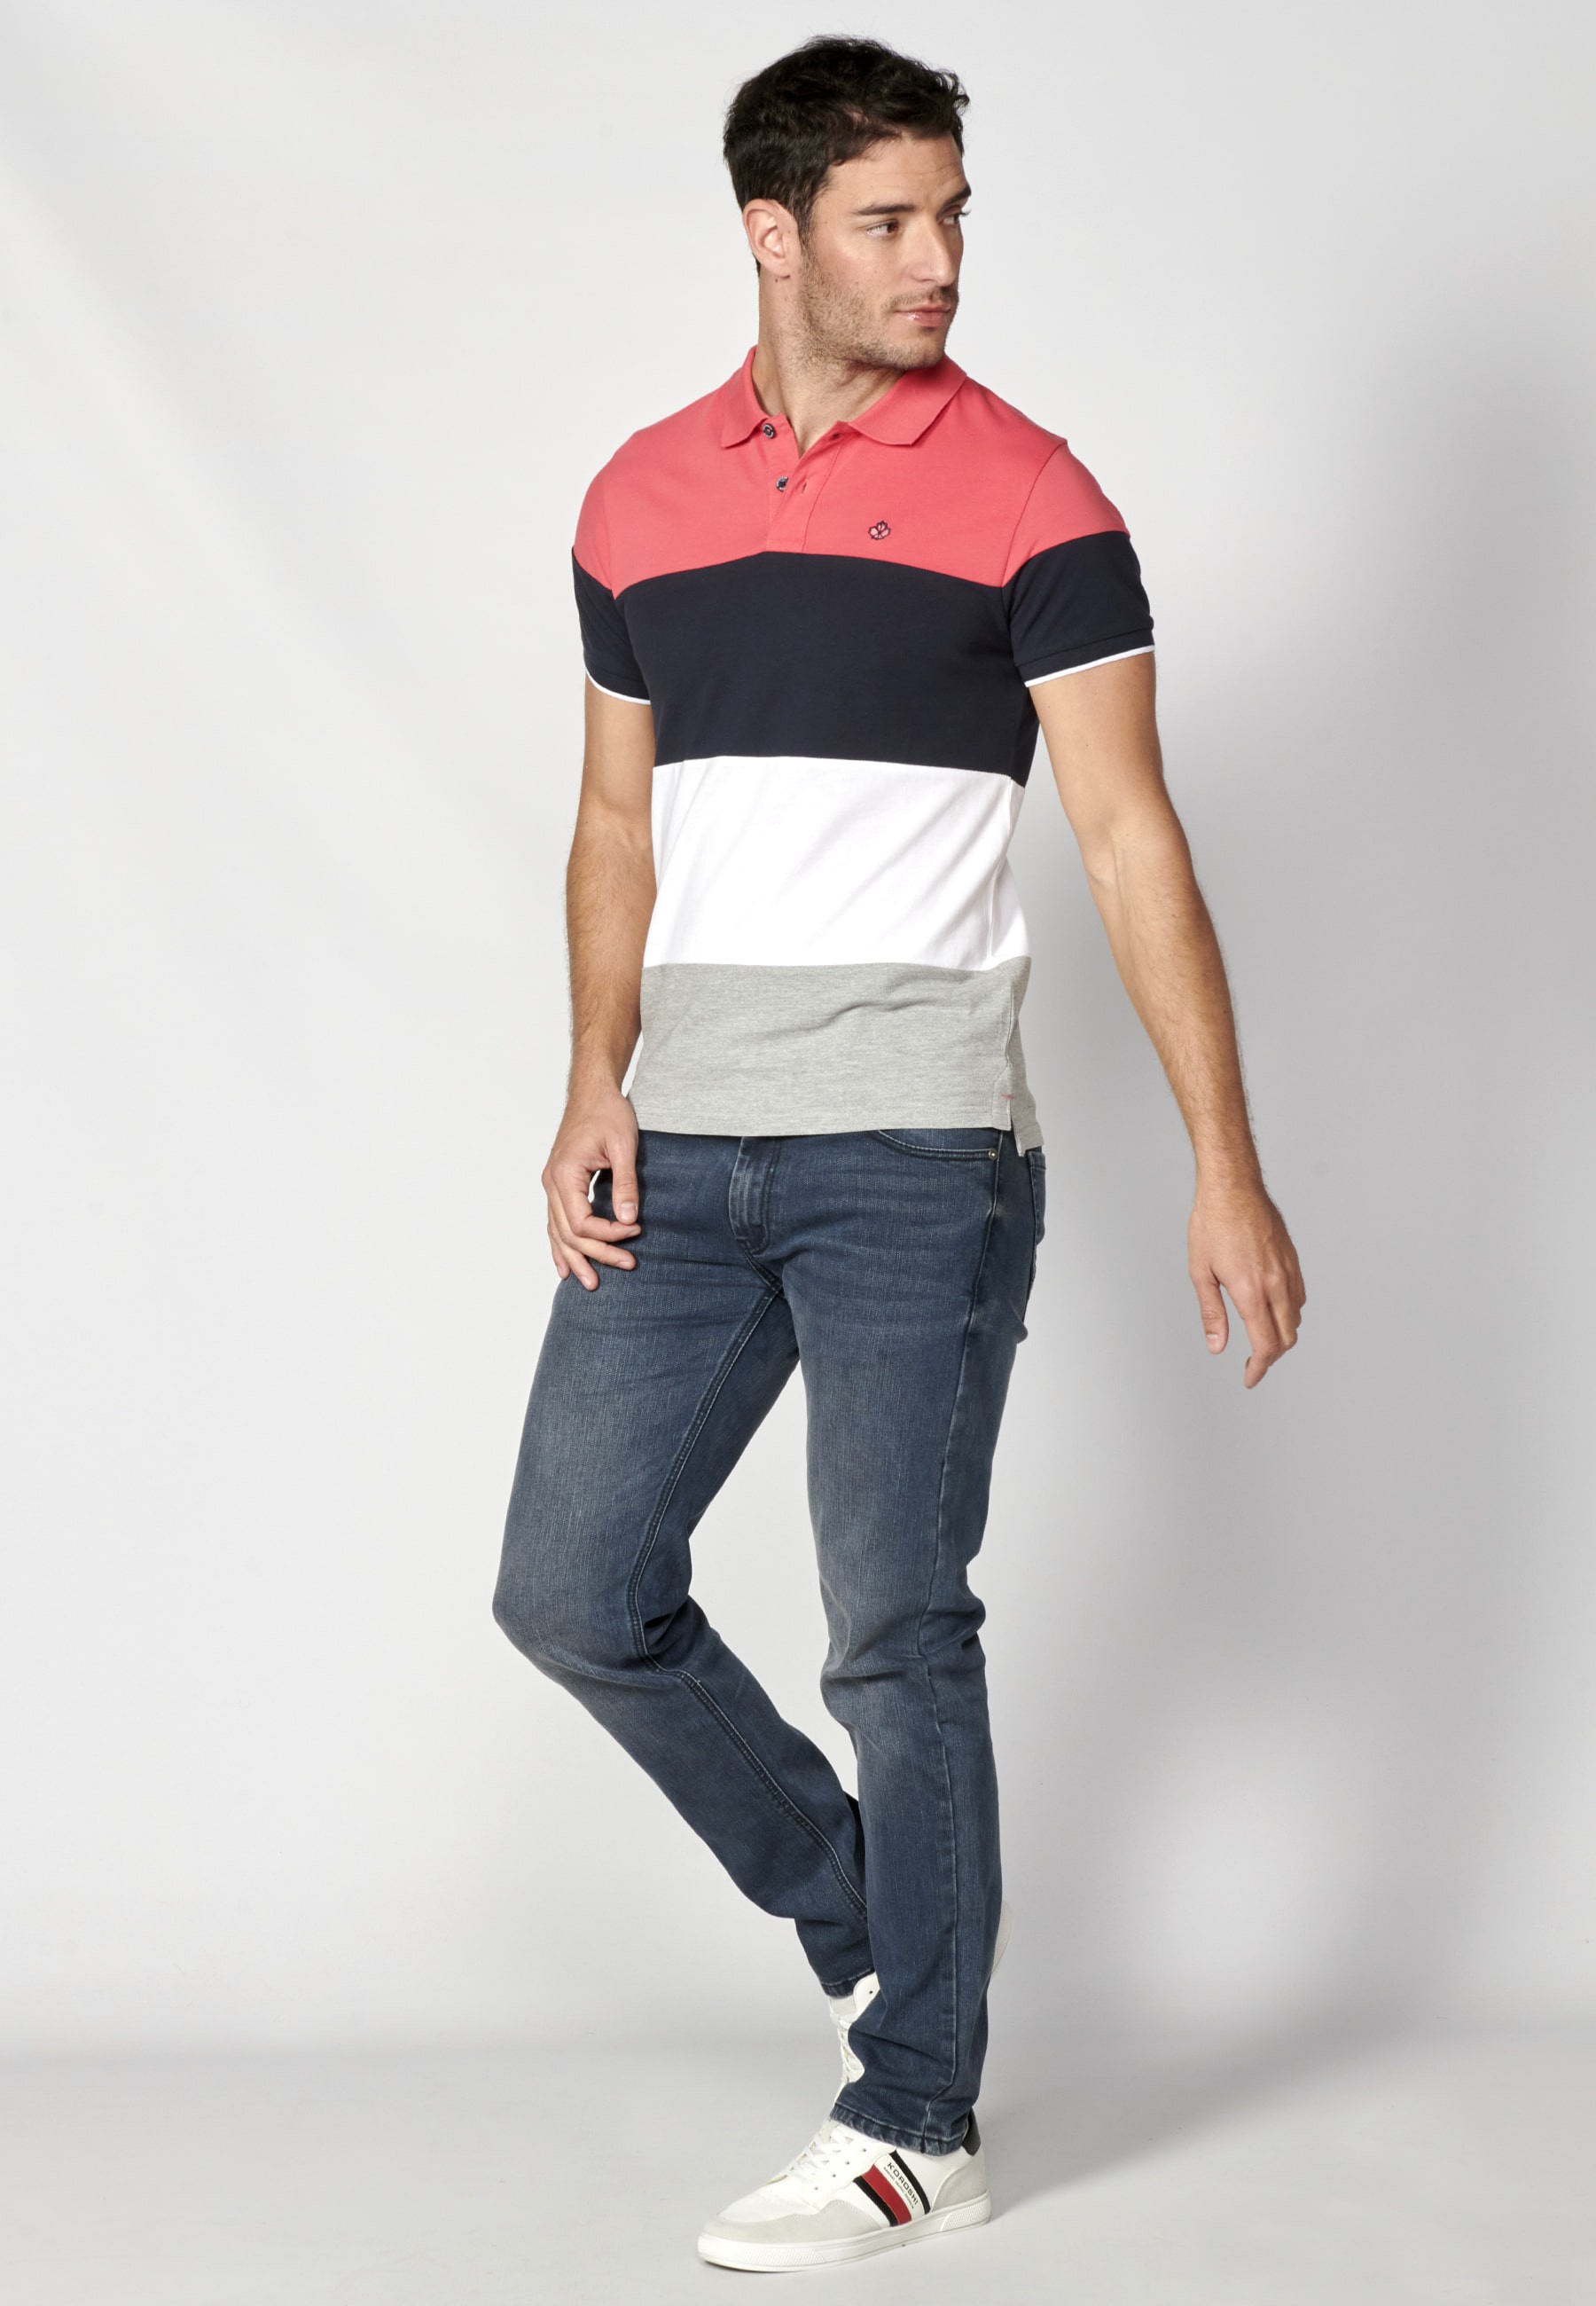 Coral Striped Cotton Short Sleeve Polo Shirt for Men